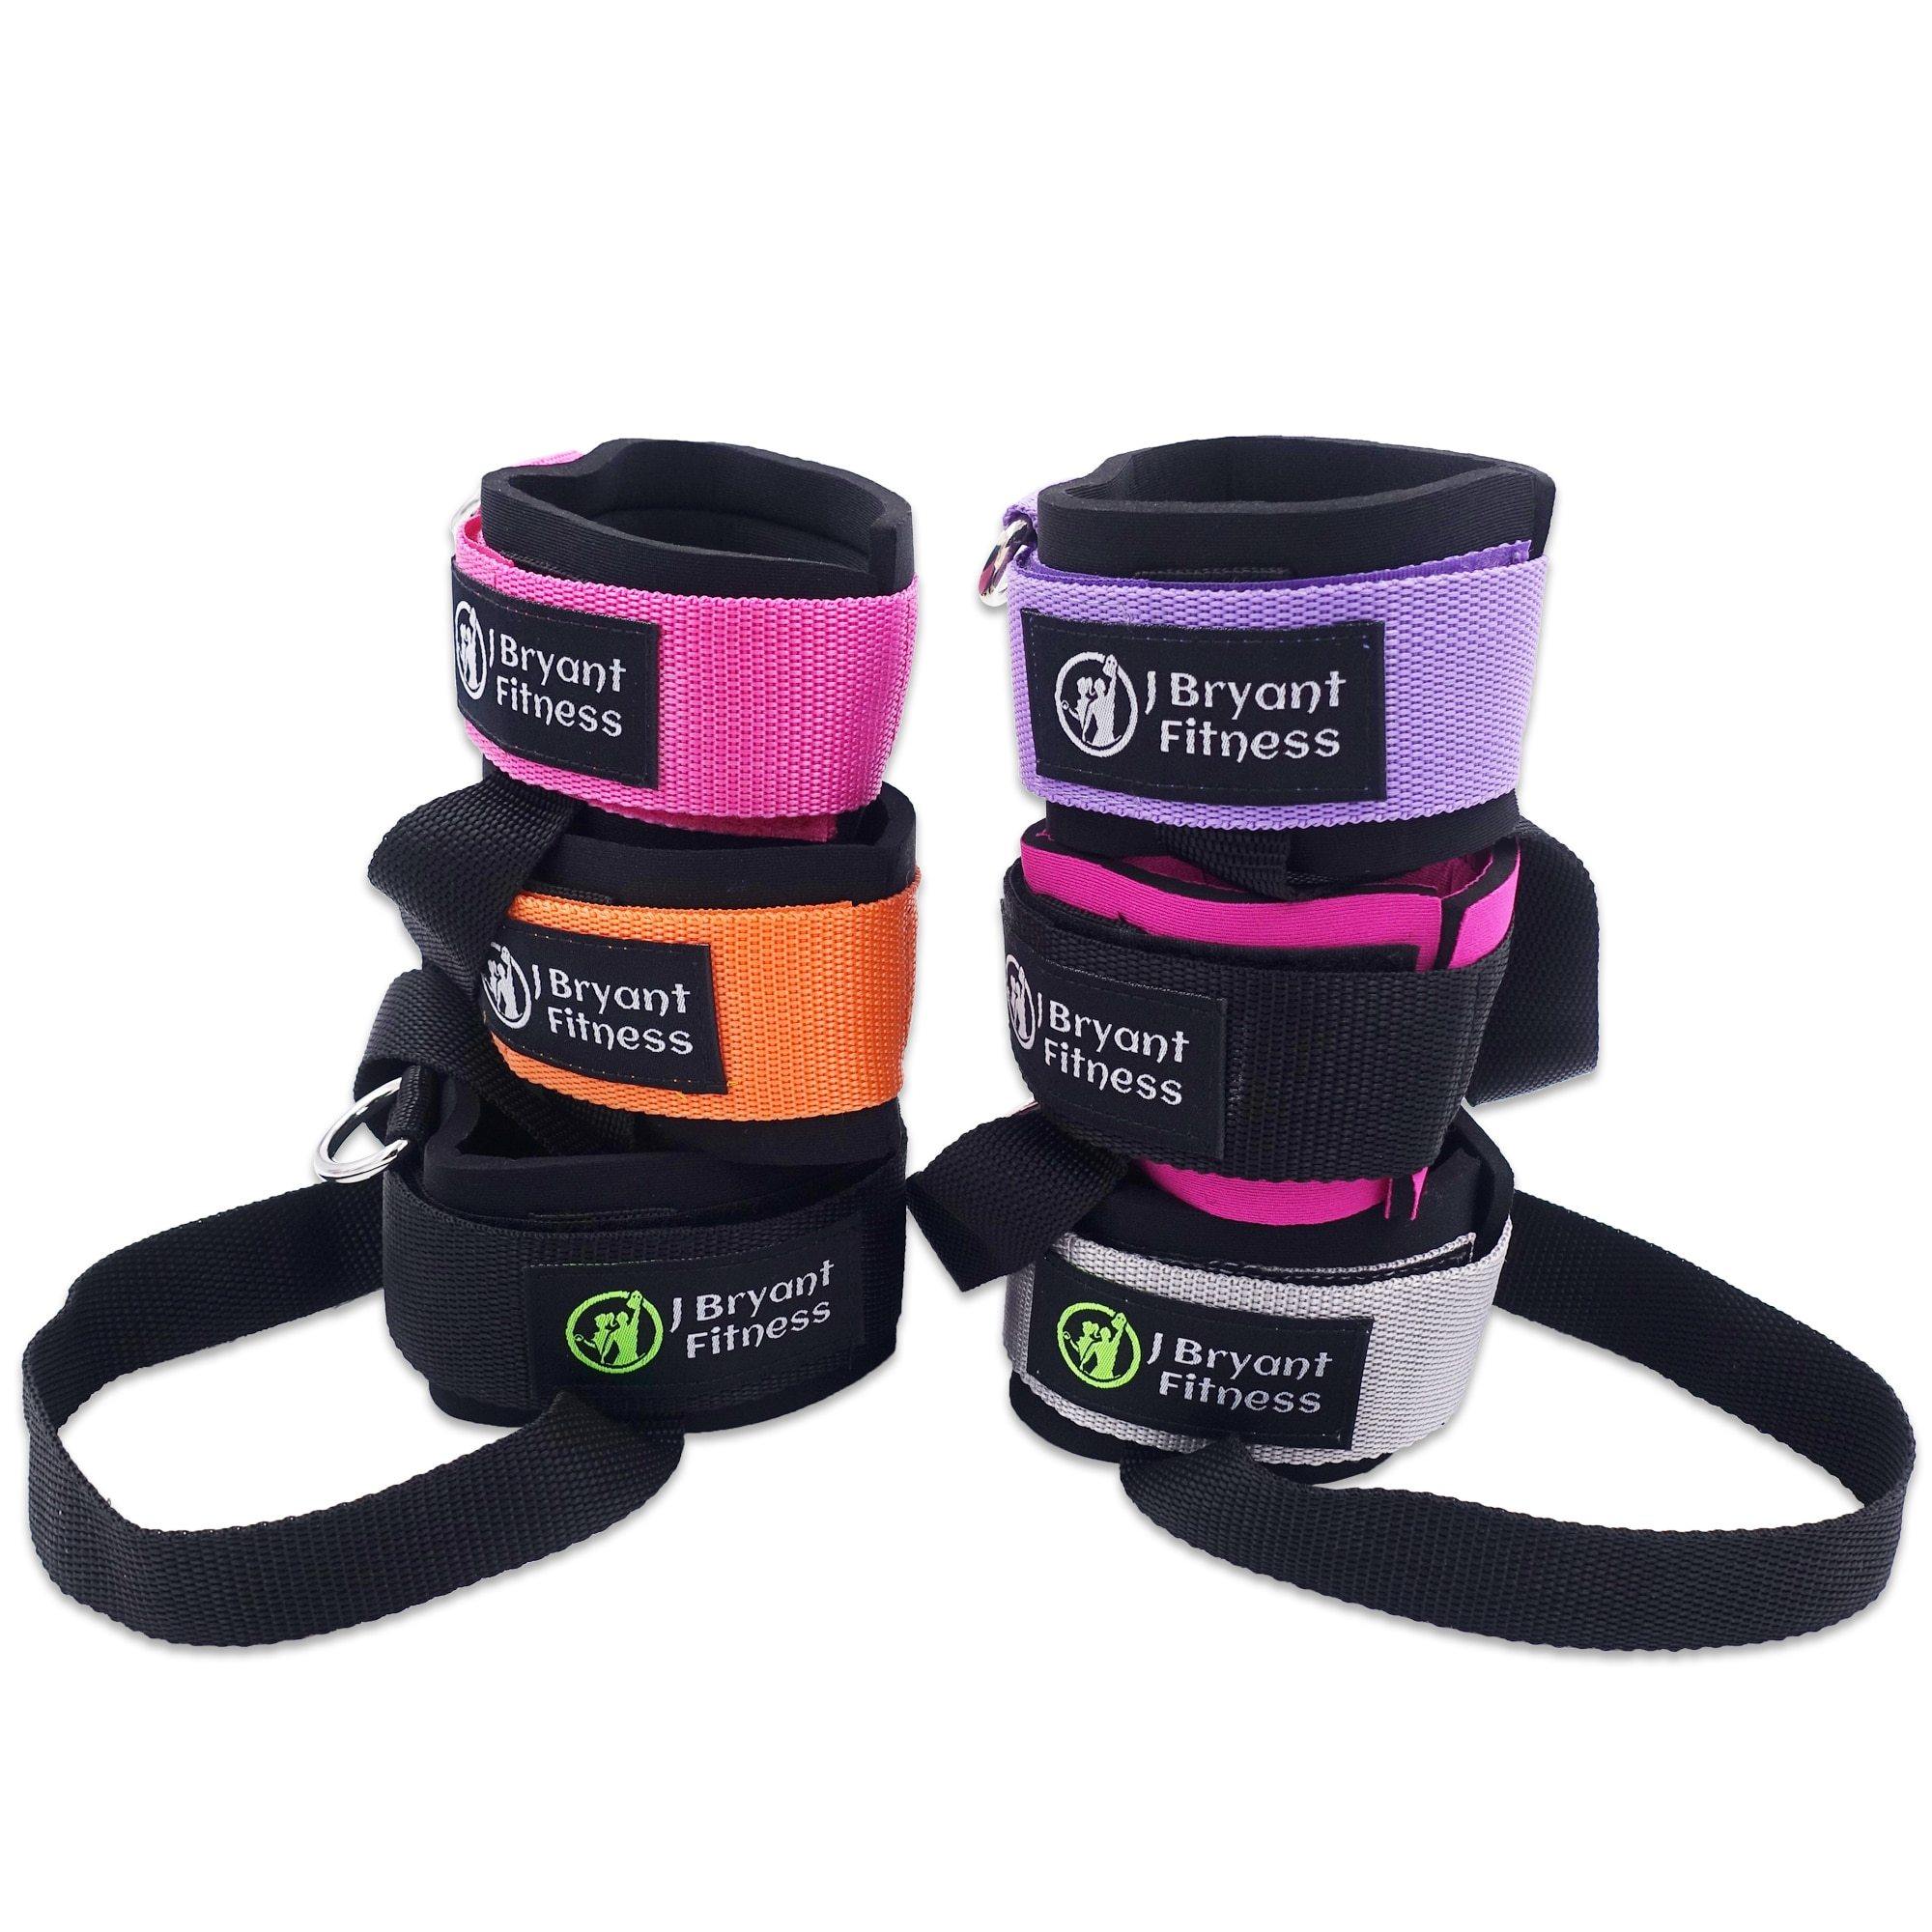 Exercise Bands Ankle Straps for Cable Machines | Home Gym Fitness Equipment - SuperShop.Rocks